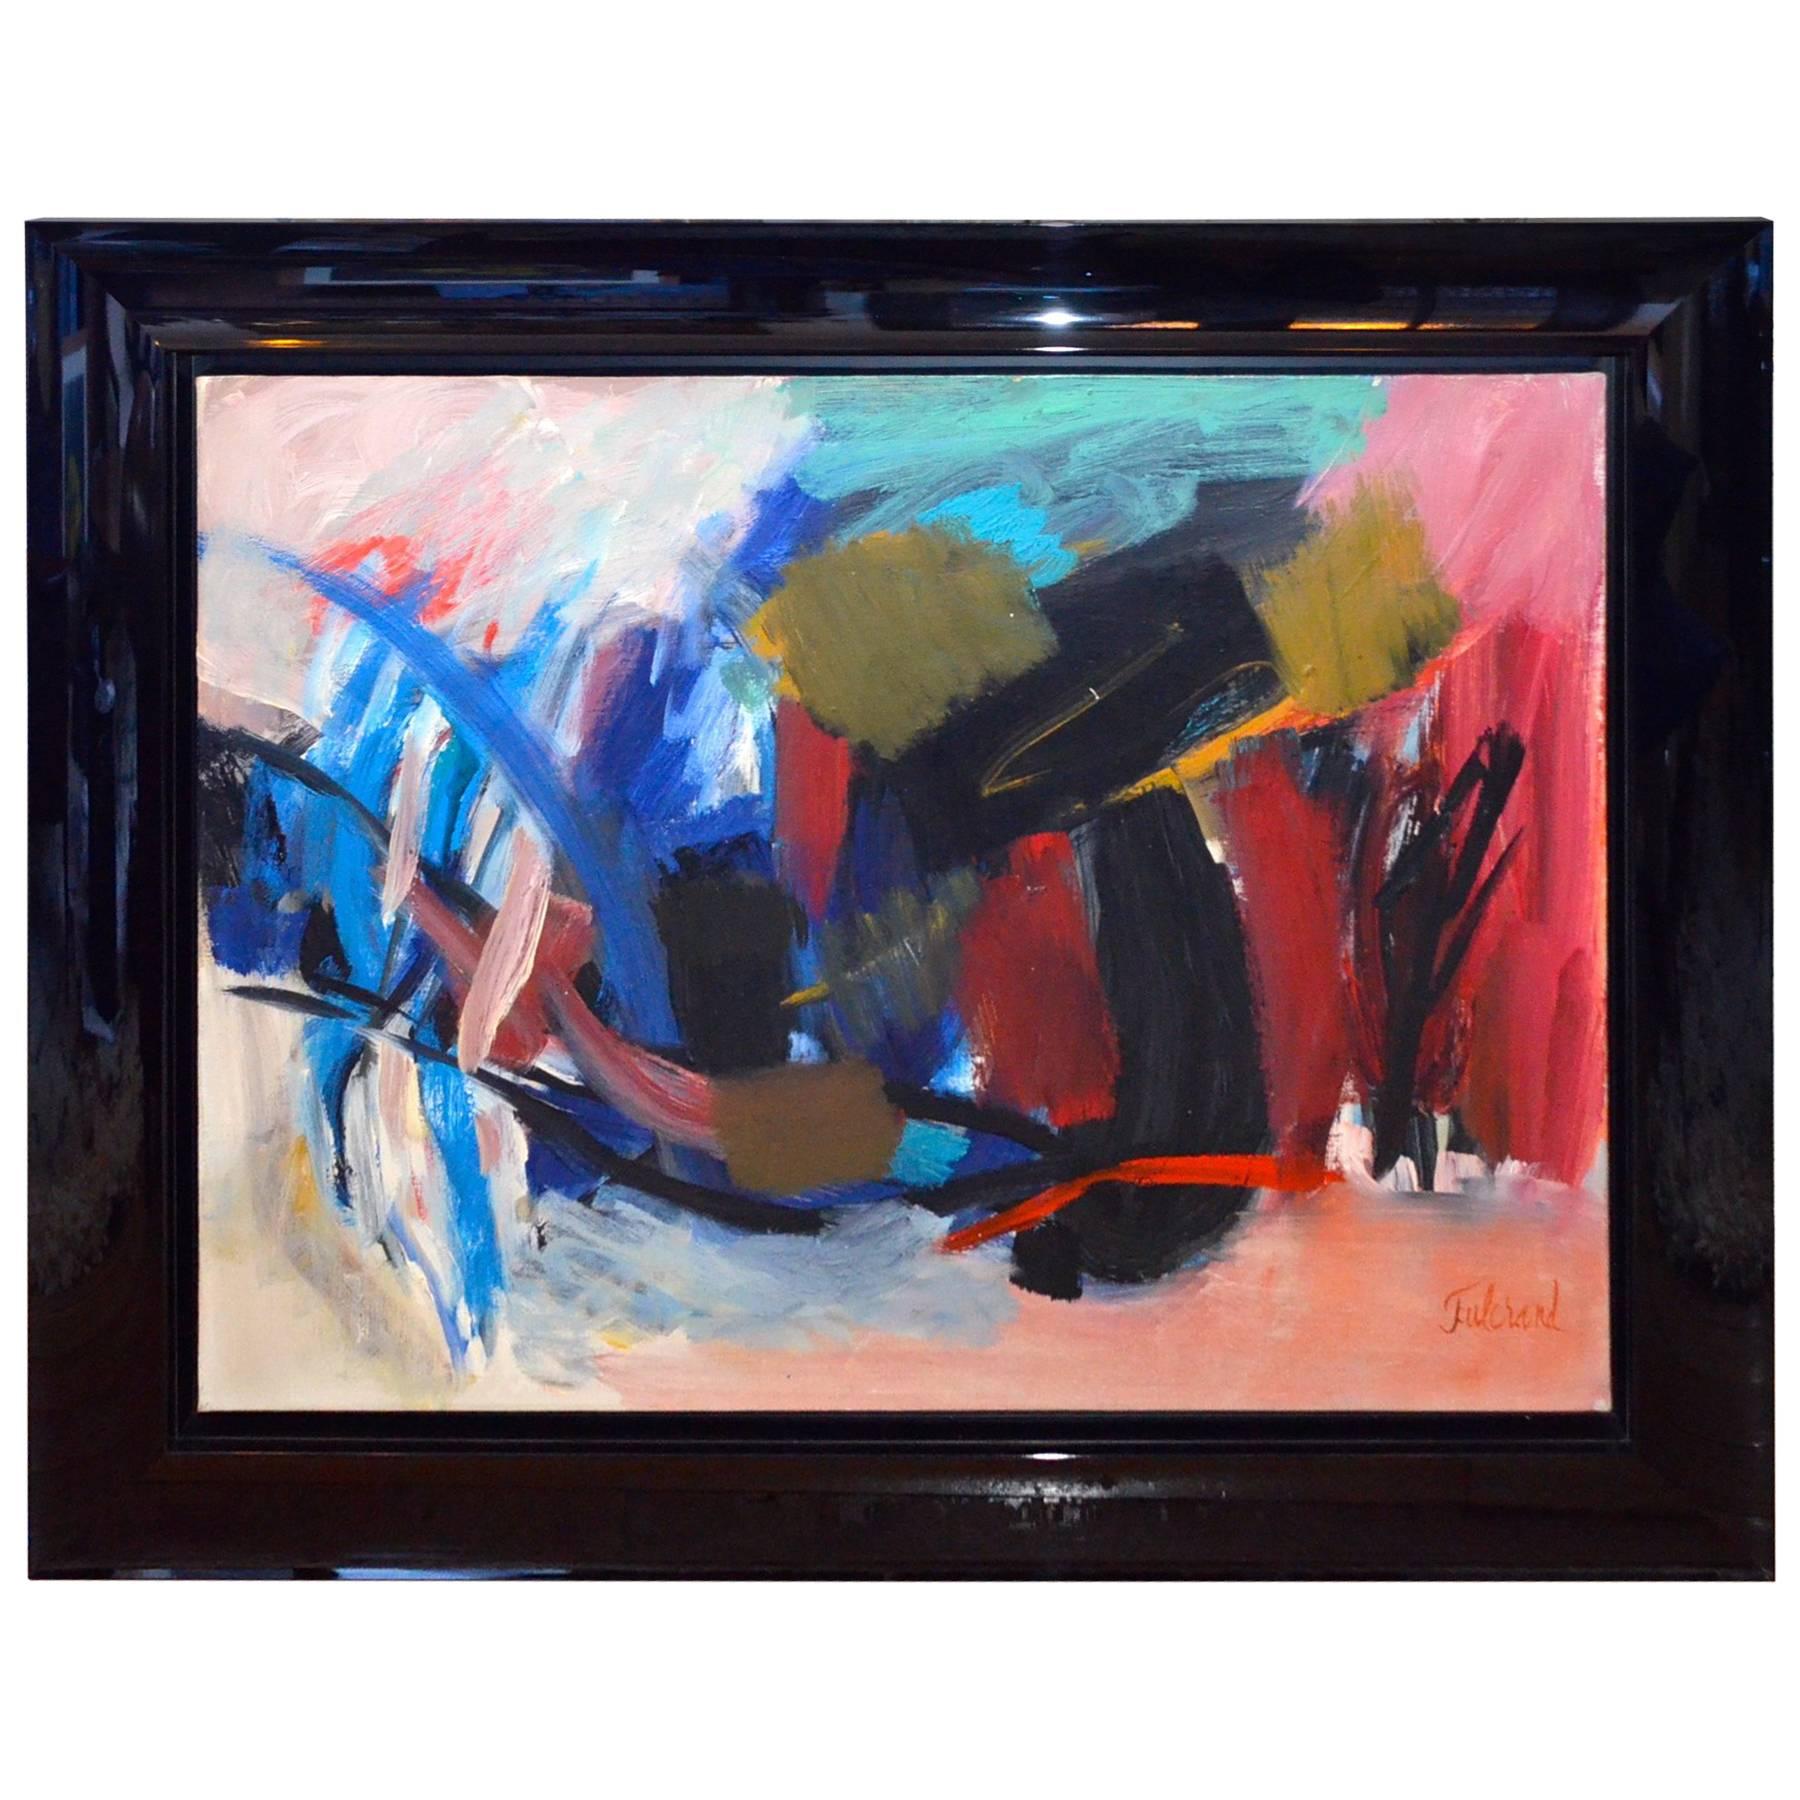 Pierre Fulcrand Oil on Canvas, Abstraction, 1963 For Sale